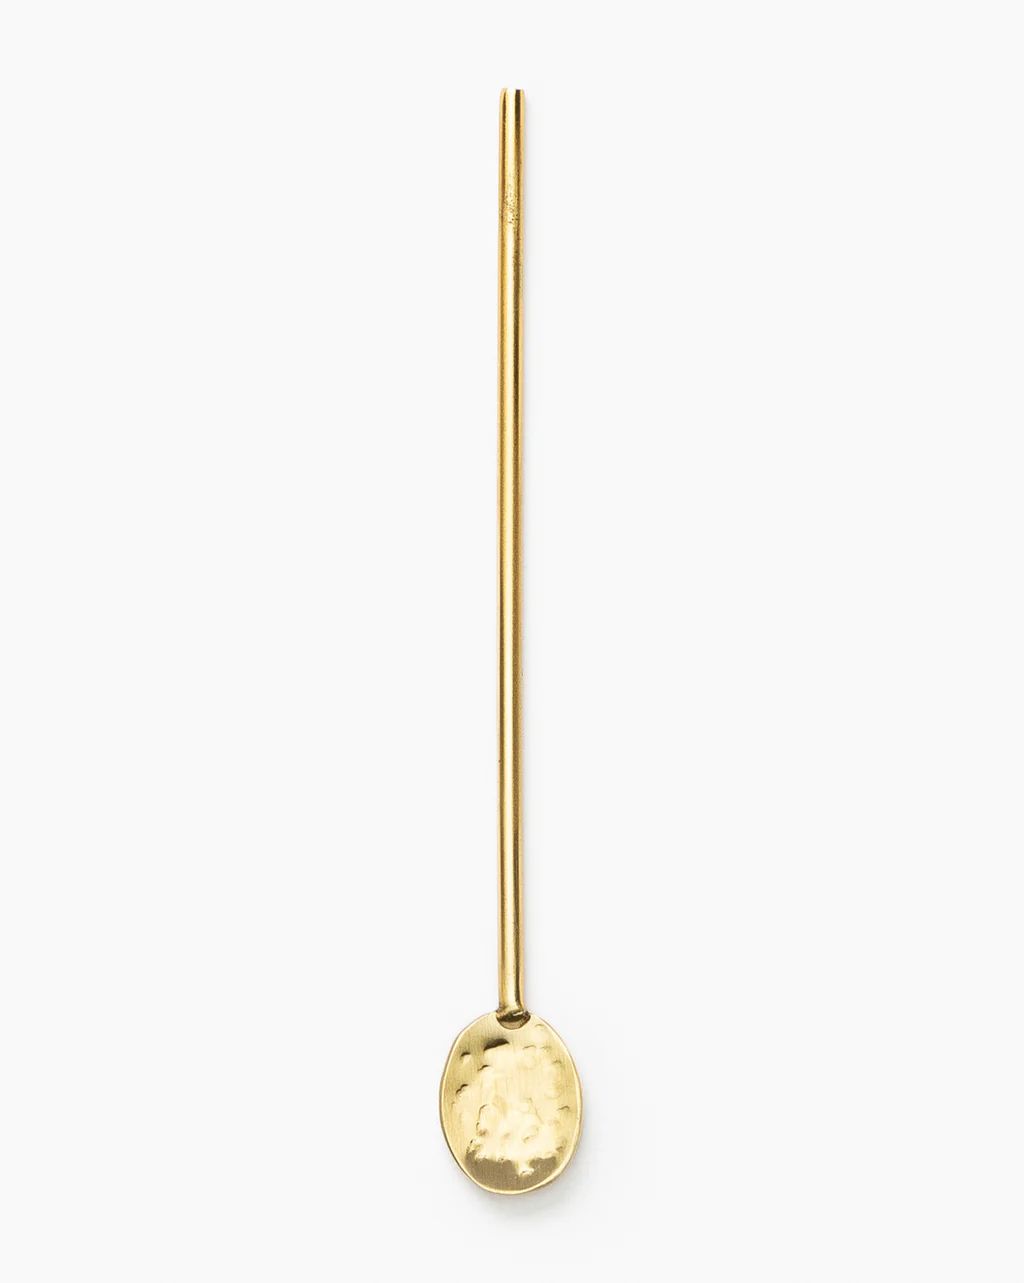 Brass Cocktail Spoon | McGee & Co.